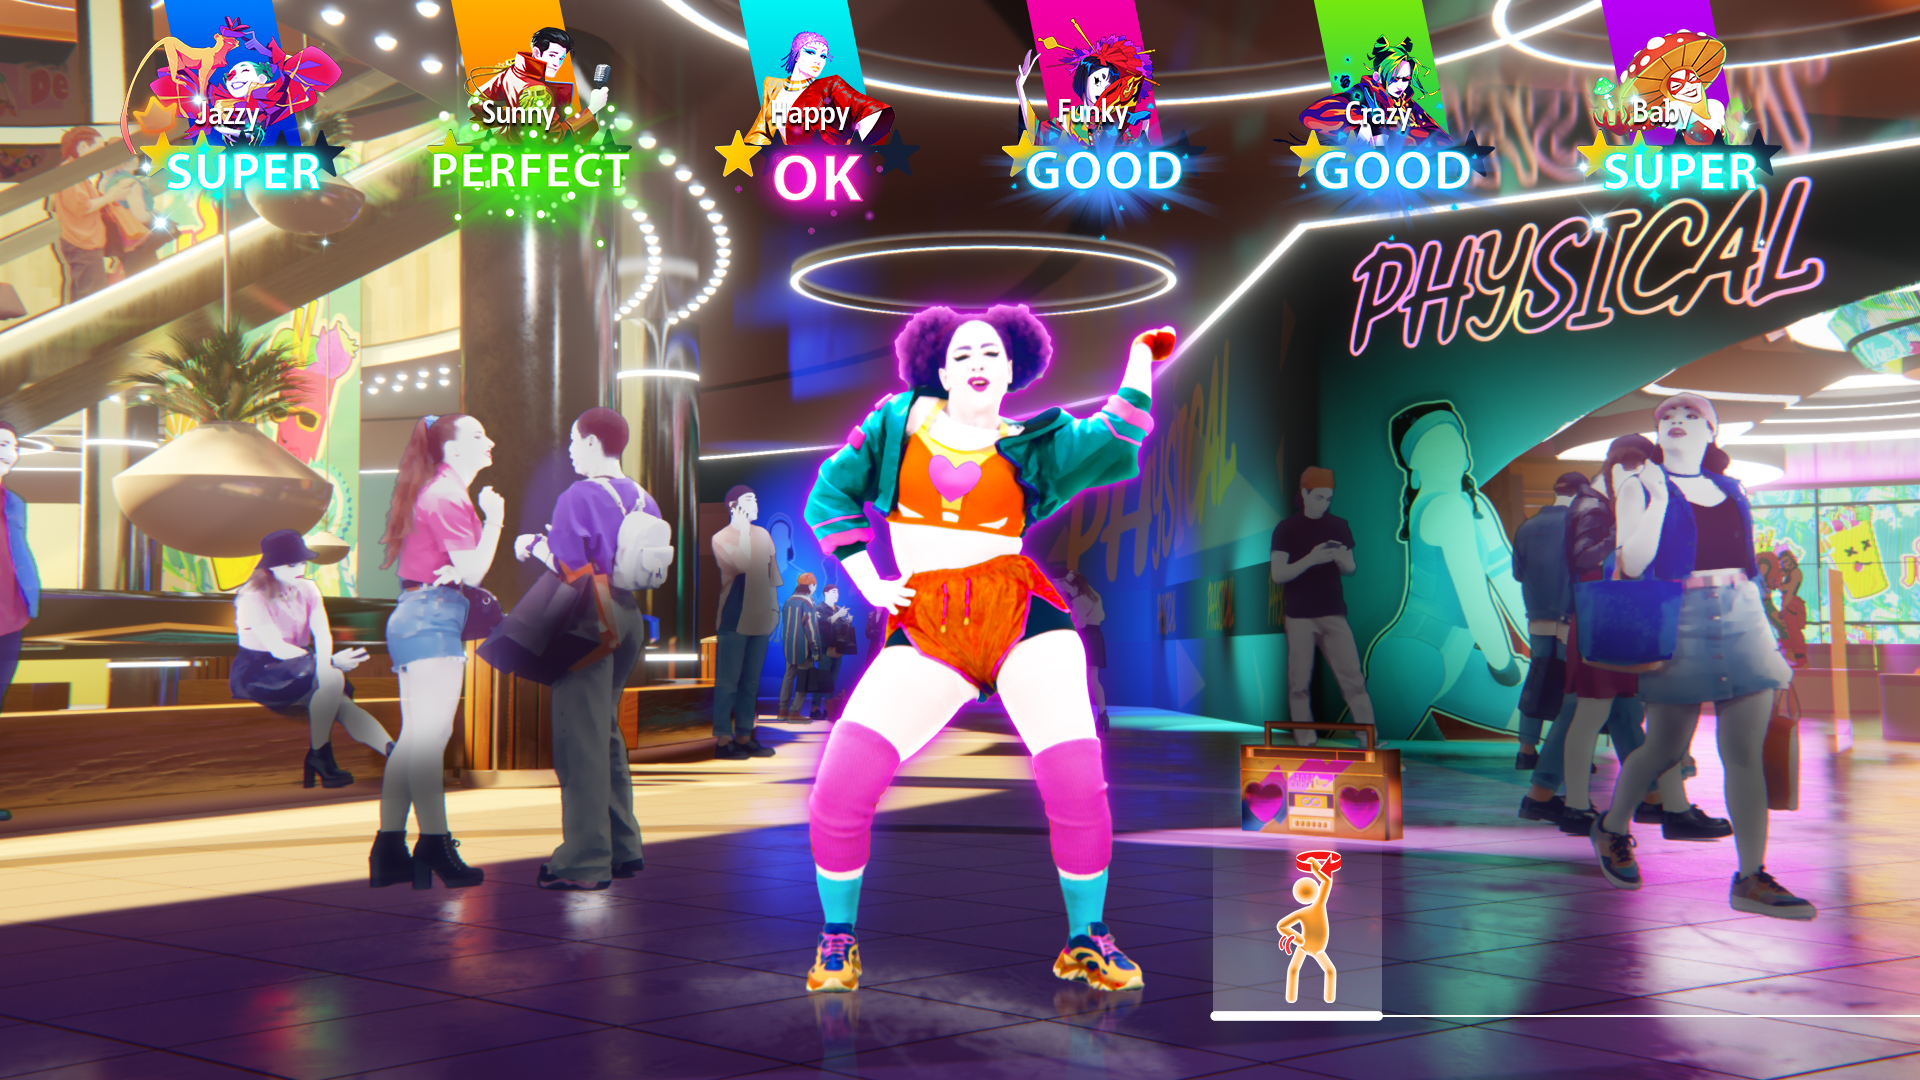 Just Dance 2023 (Code in the Box)